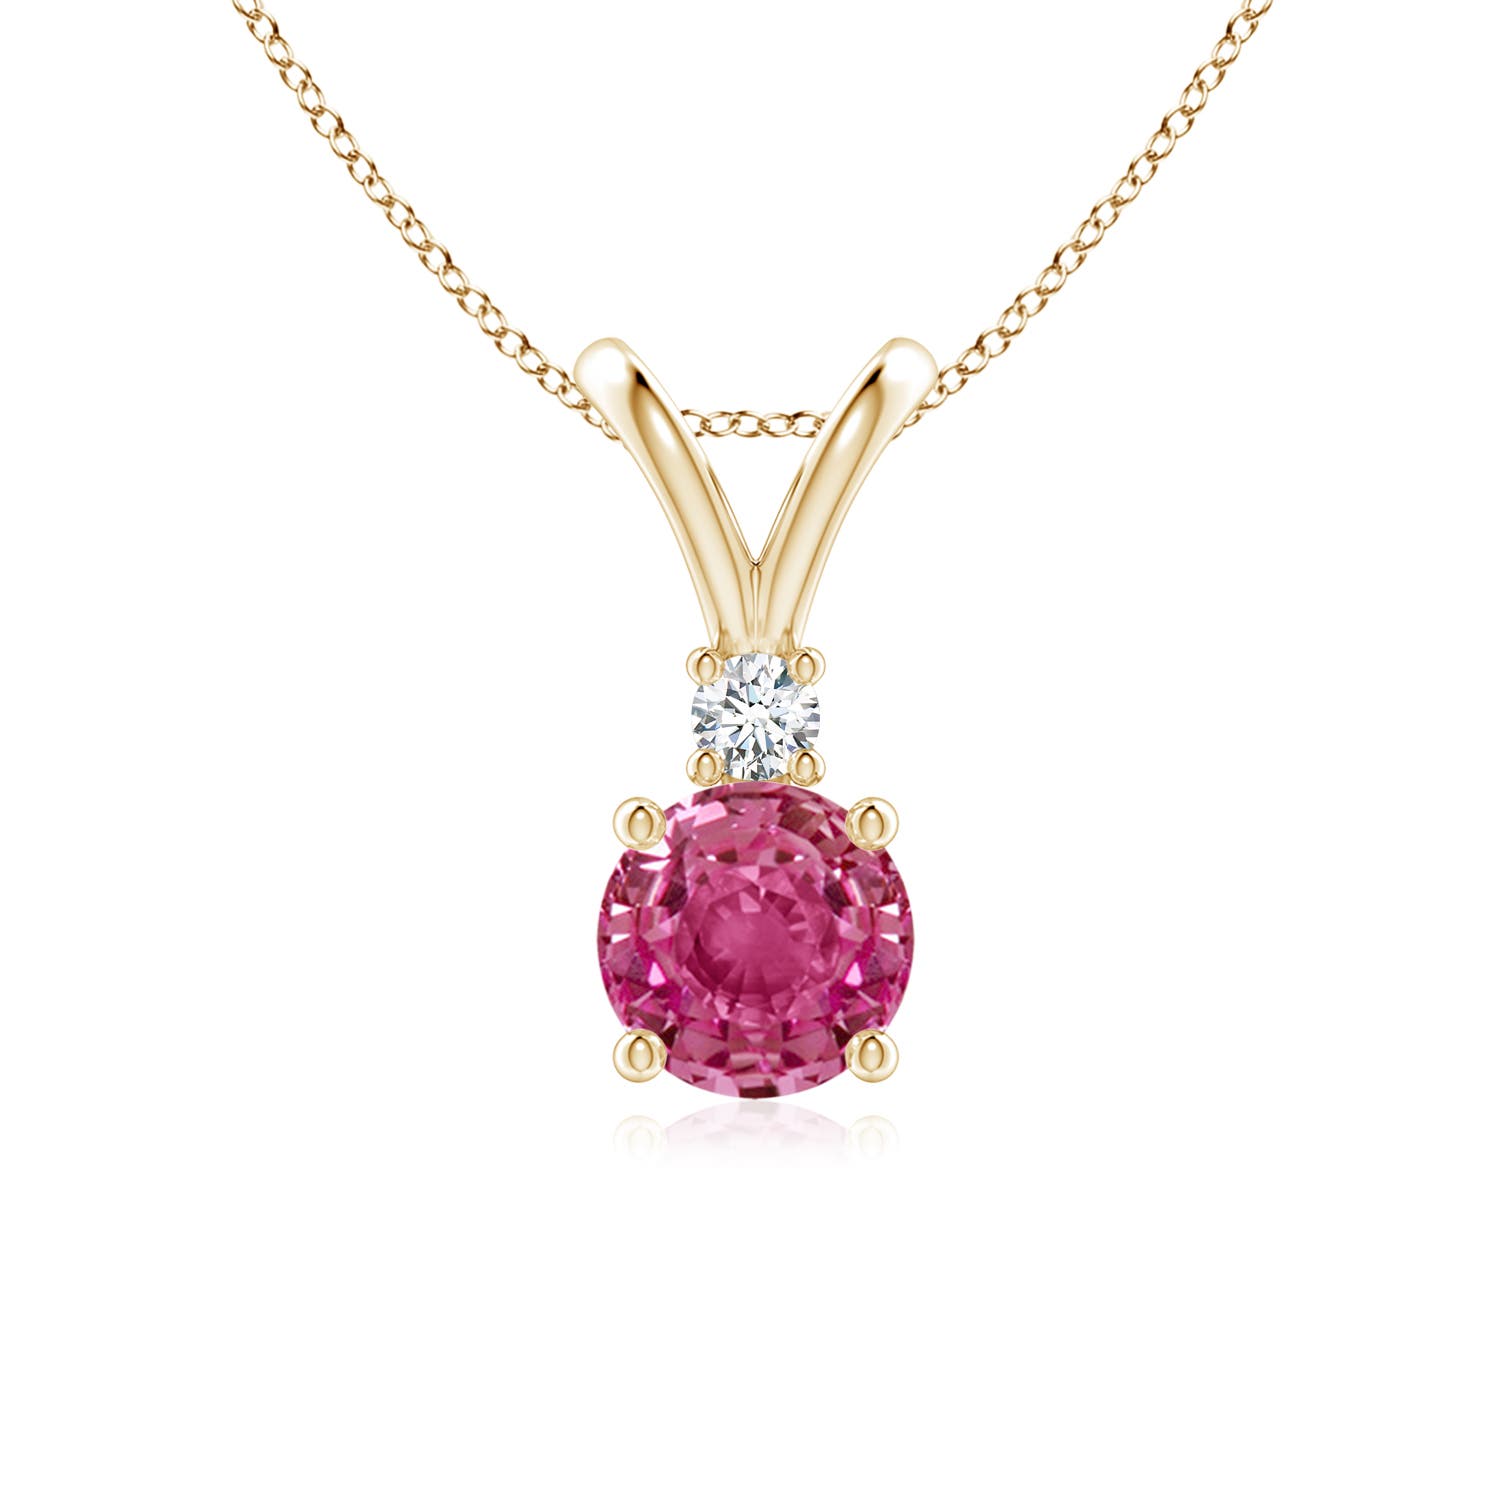 AAAA - Pink Sapphire / 1.04 CT / 14 KT Yellow Gold